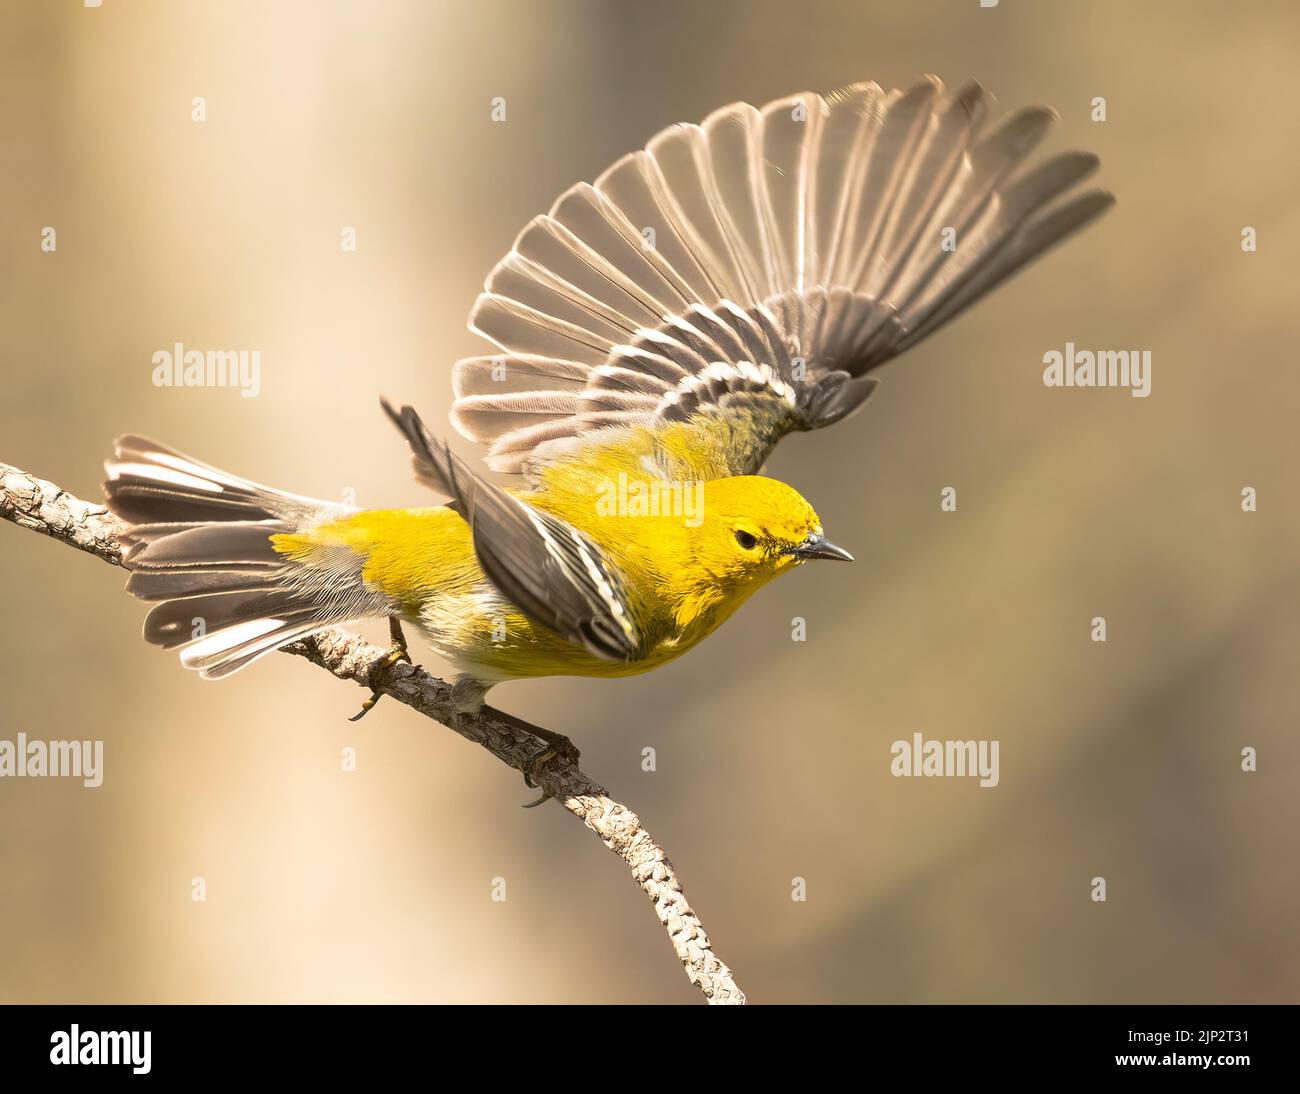 A shallow focus shot of a pine warbler (Setophaga pinus) taking off brom a branch Stock Photo